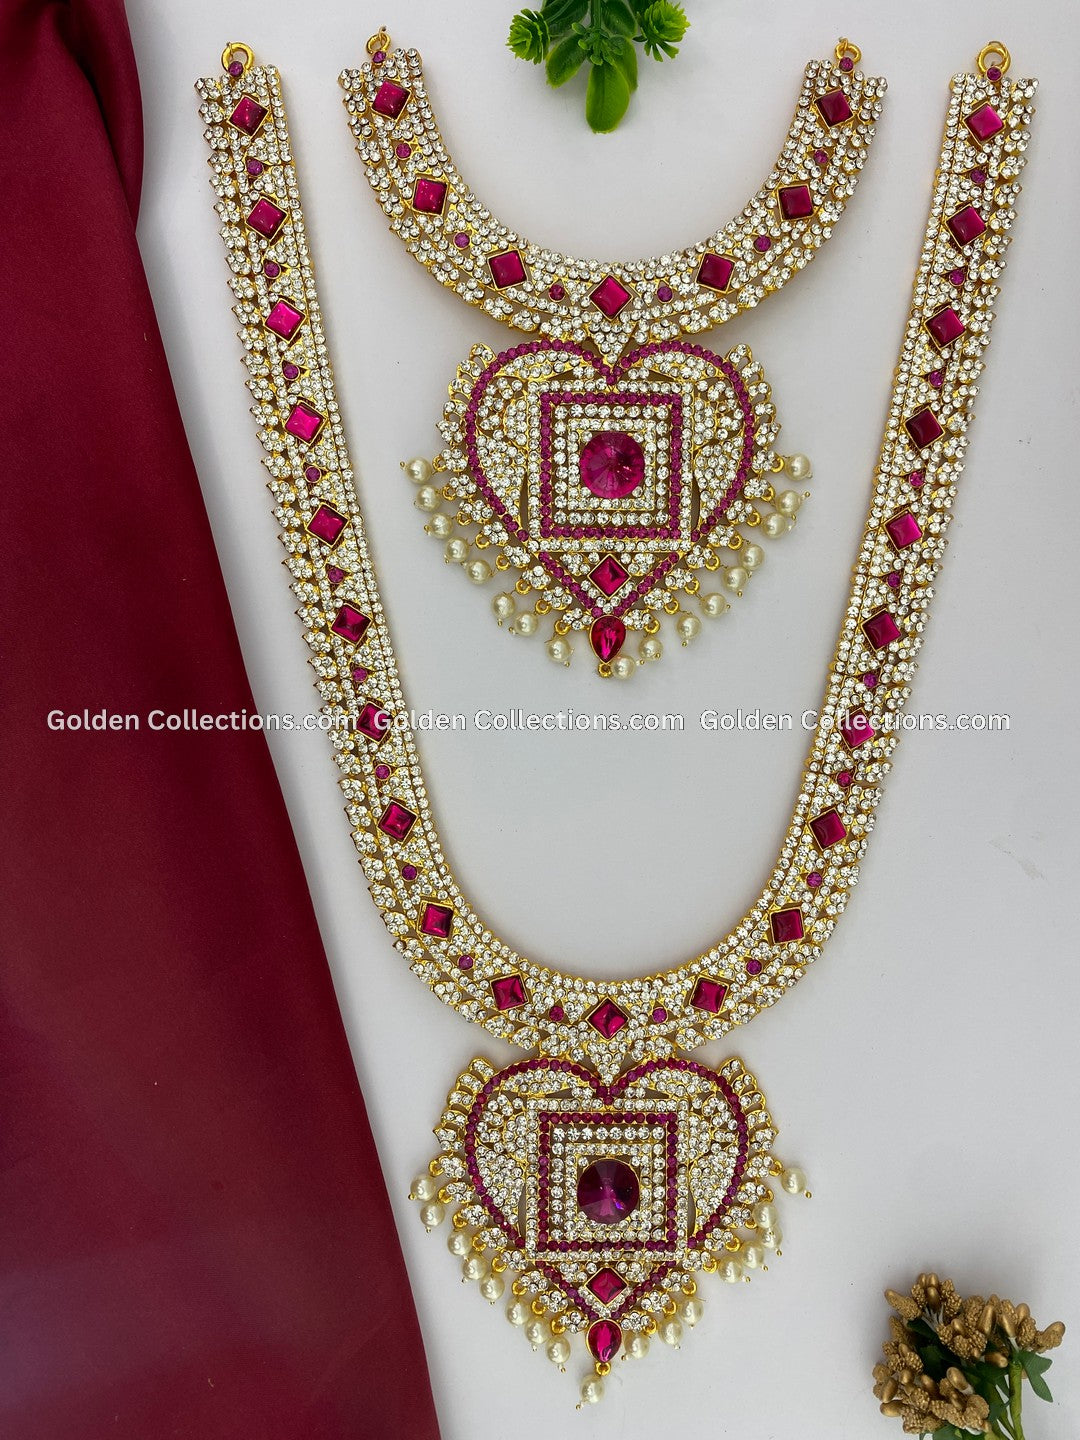 Shop Deity Ornaments Online - GoldenCollections